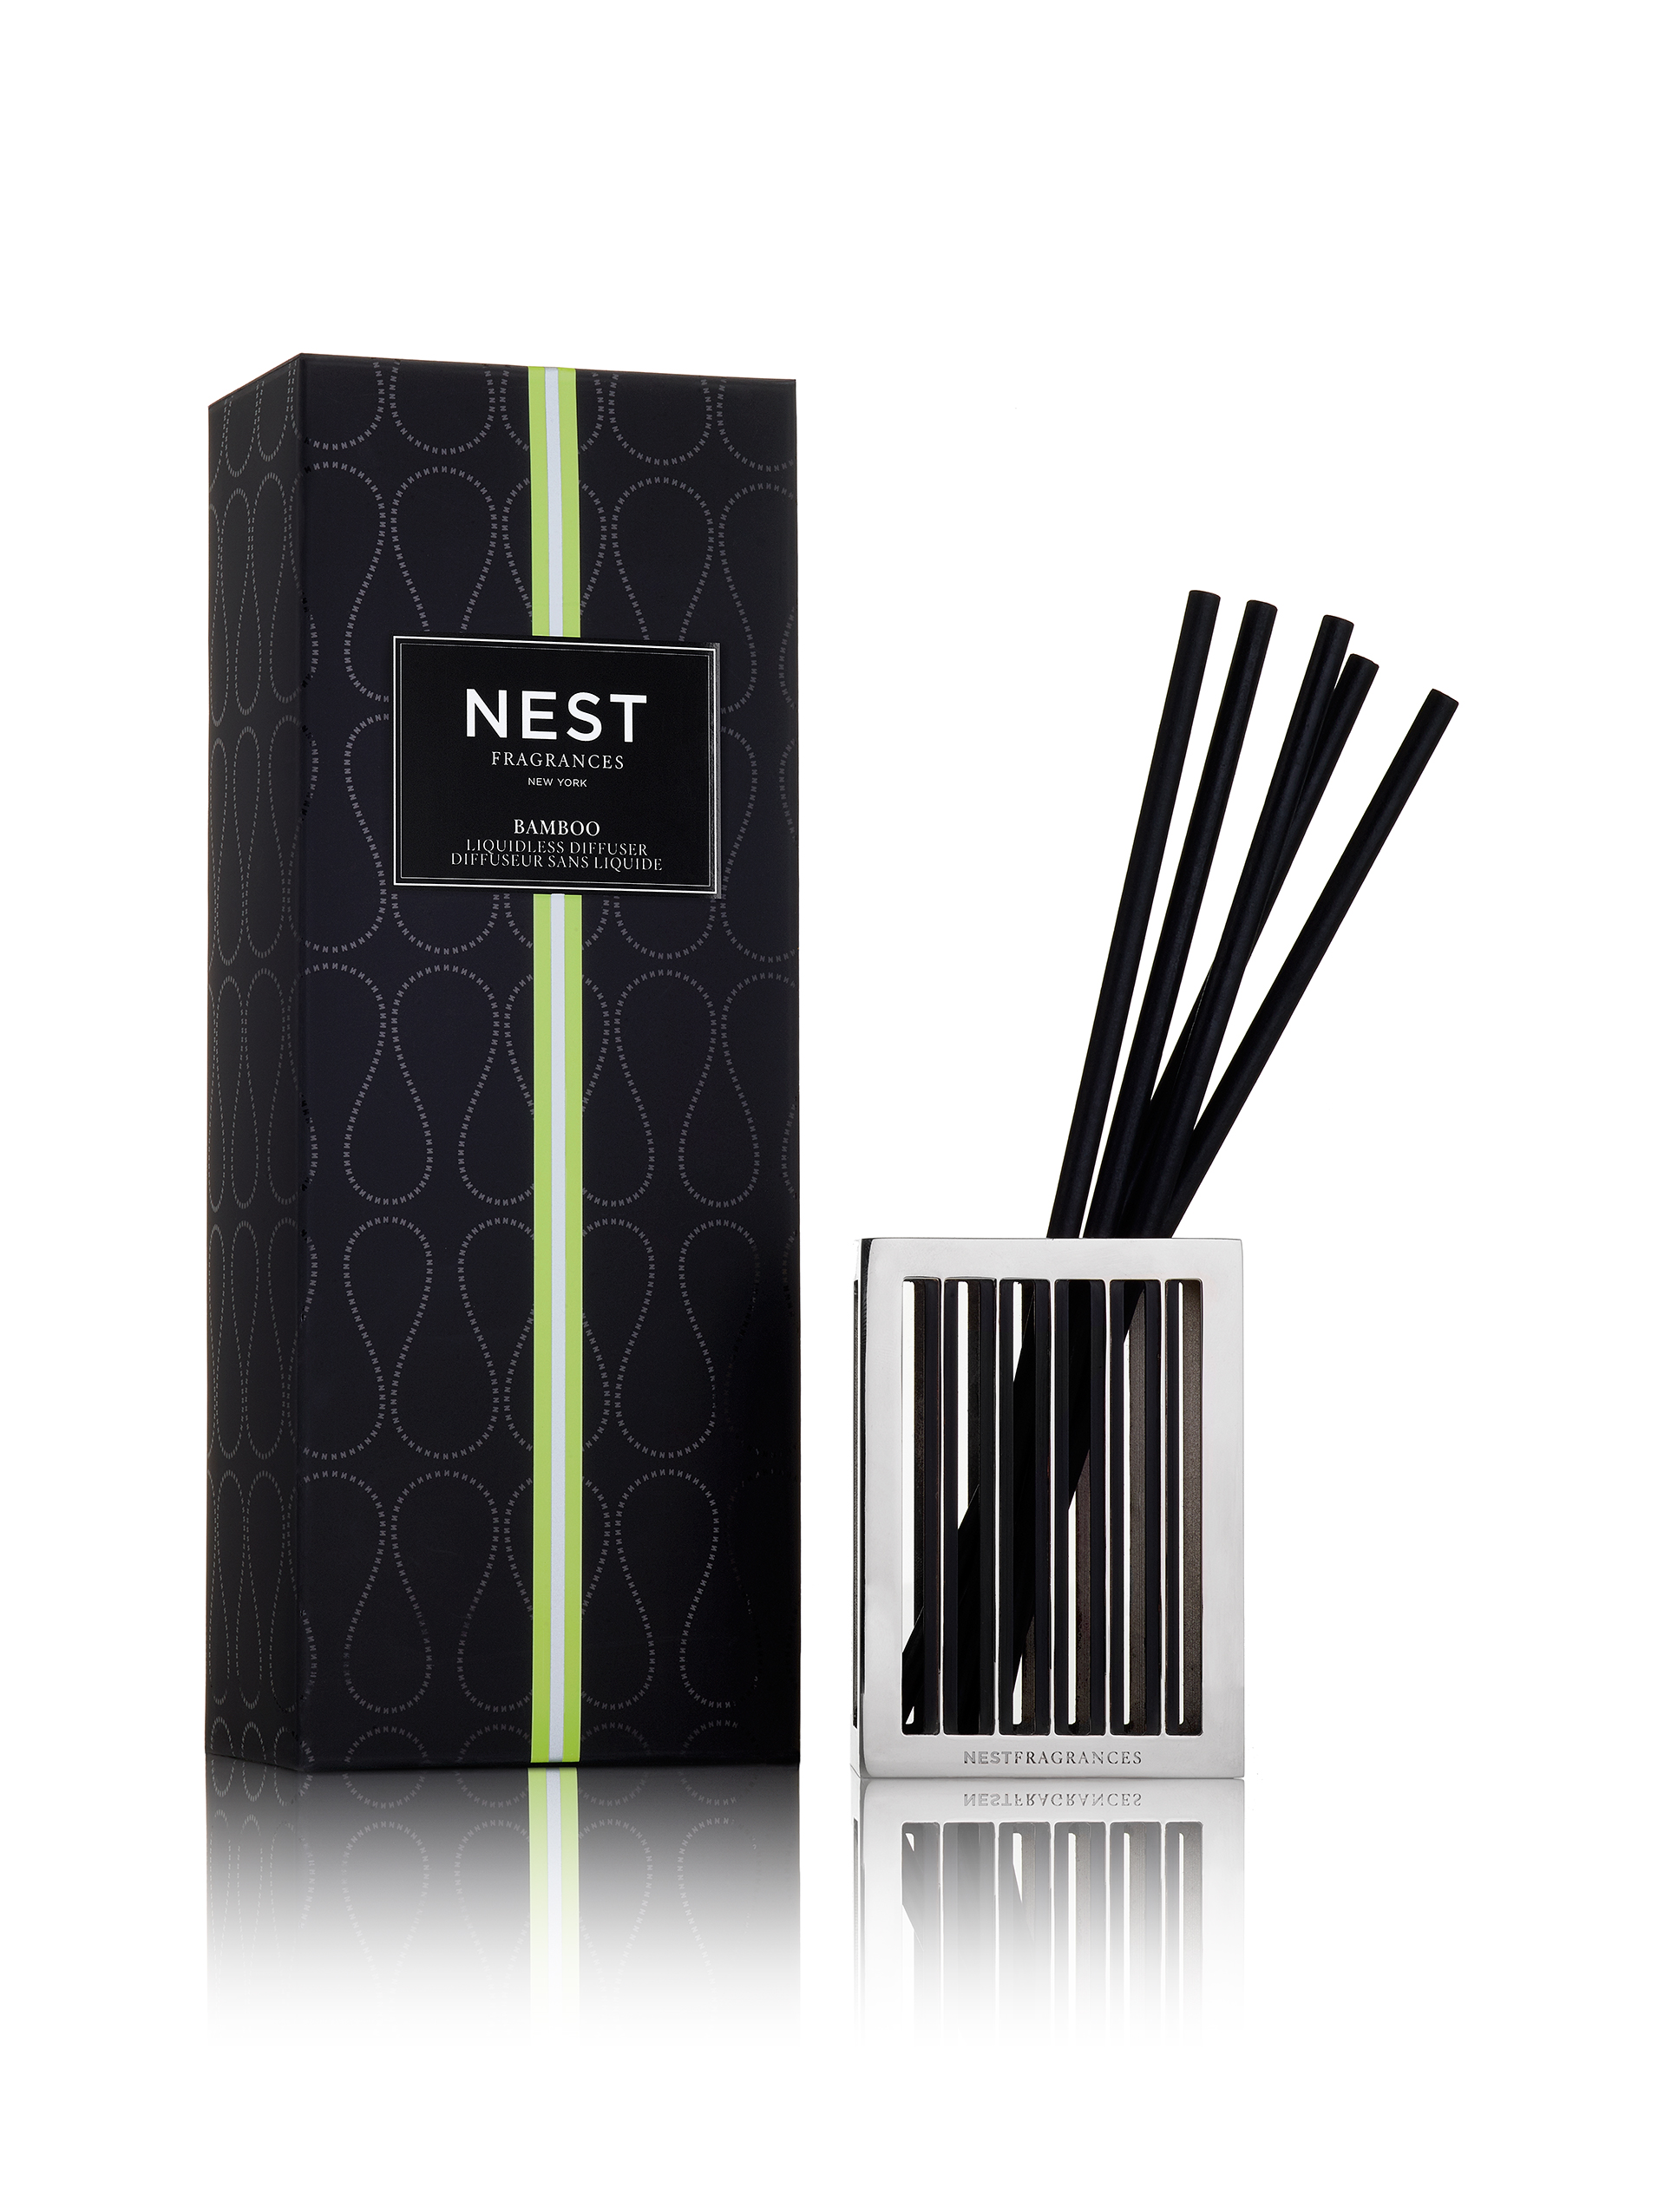 Bamboo Liquidless Diffuser by NEST Fragrances